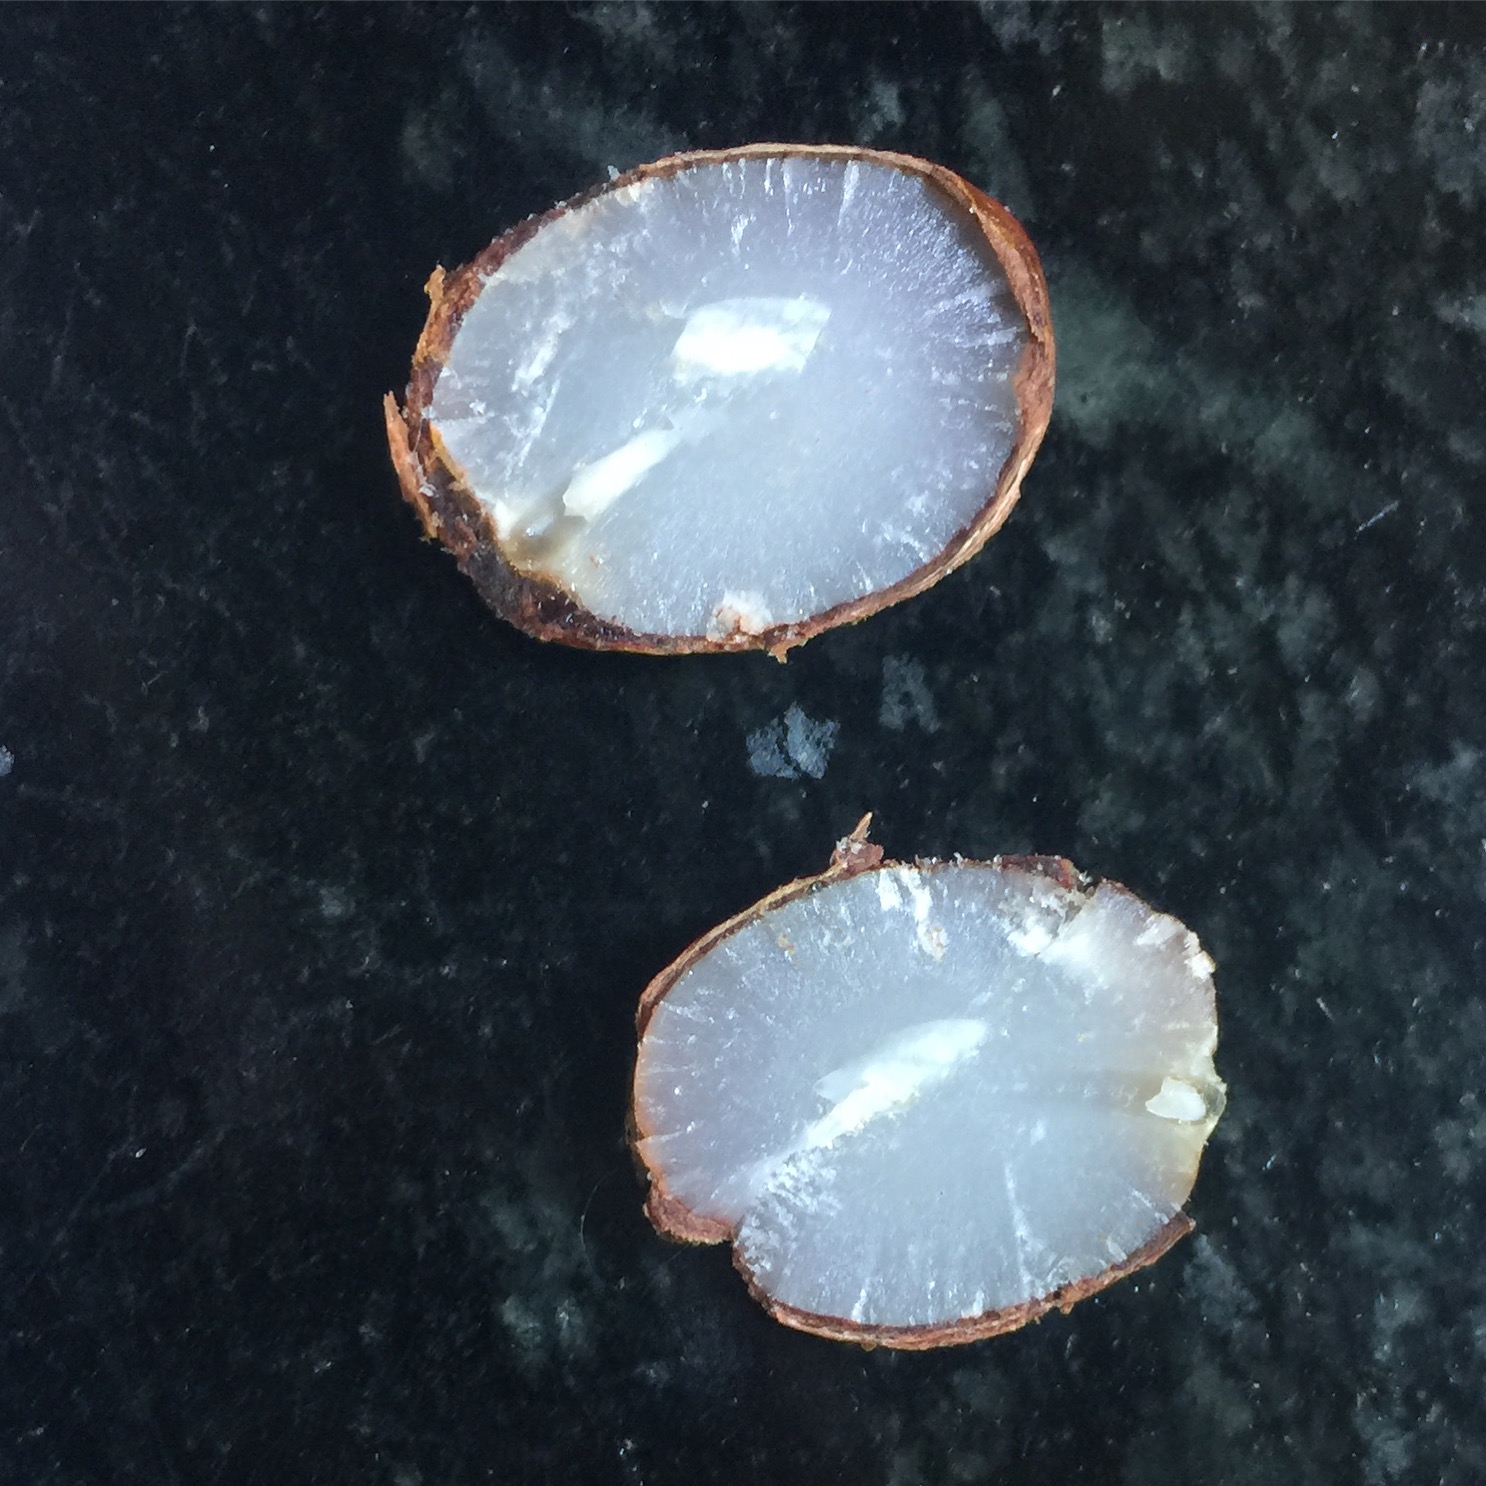 My Persimmon Seed Prediction grace grits and gardening